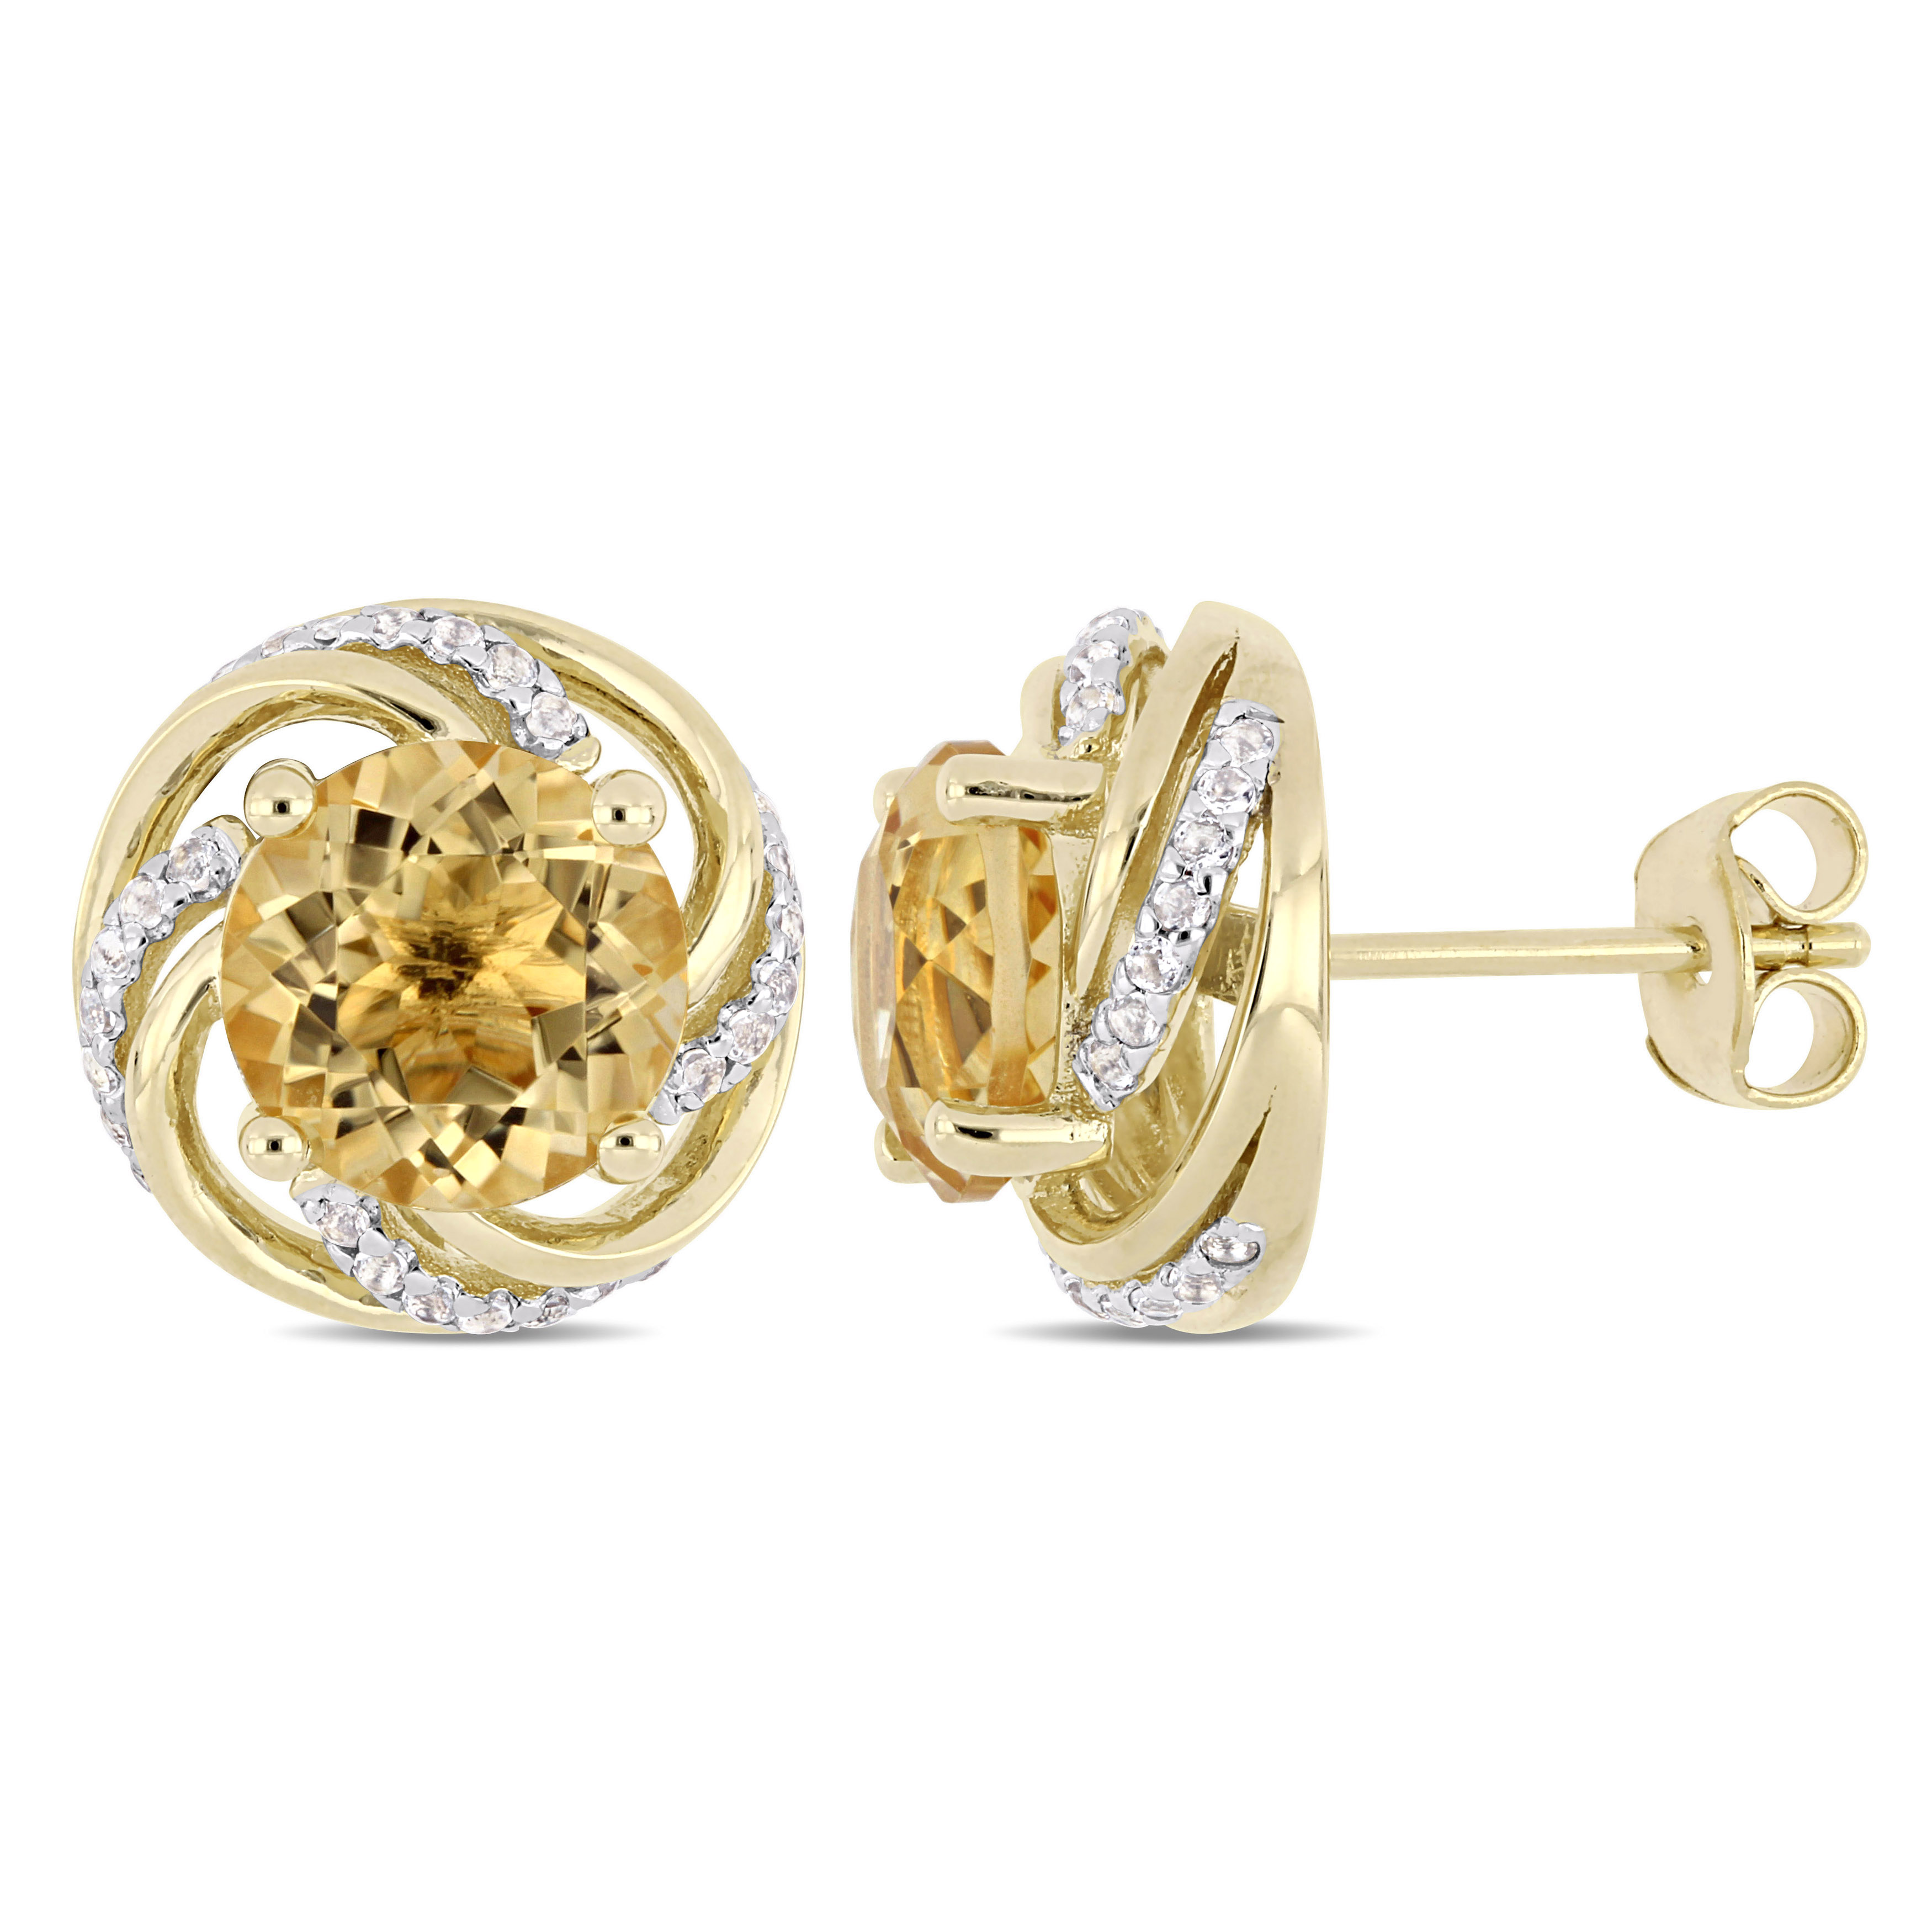 3 7/8 CT TGW Citrine and White Topaz Swirl Stud Earrings in Yellow Plated Sterling Silver